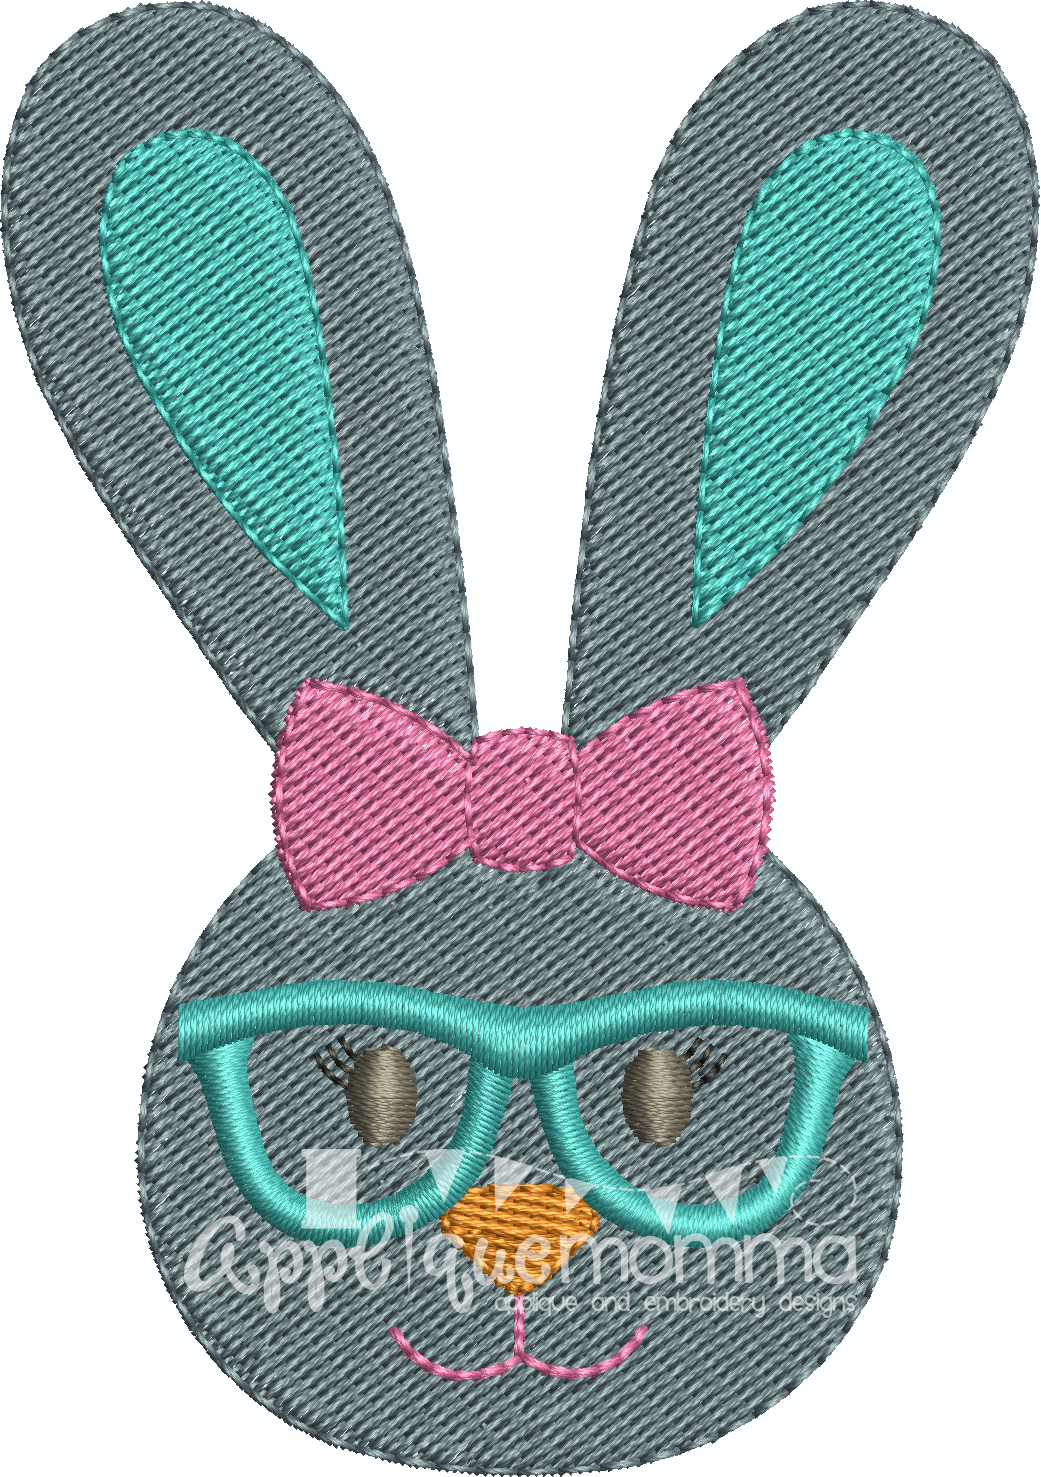 Mrs. Easter Bunny Mini Embroidery Design